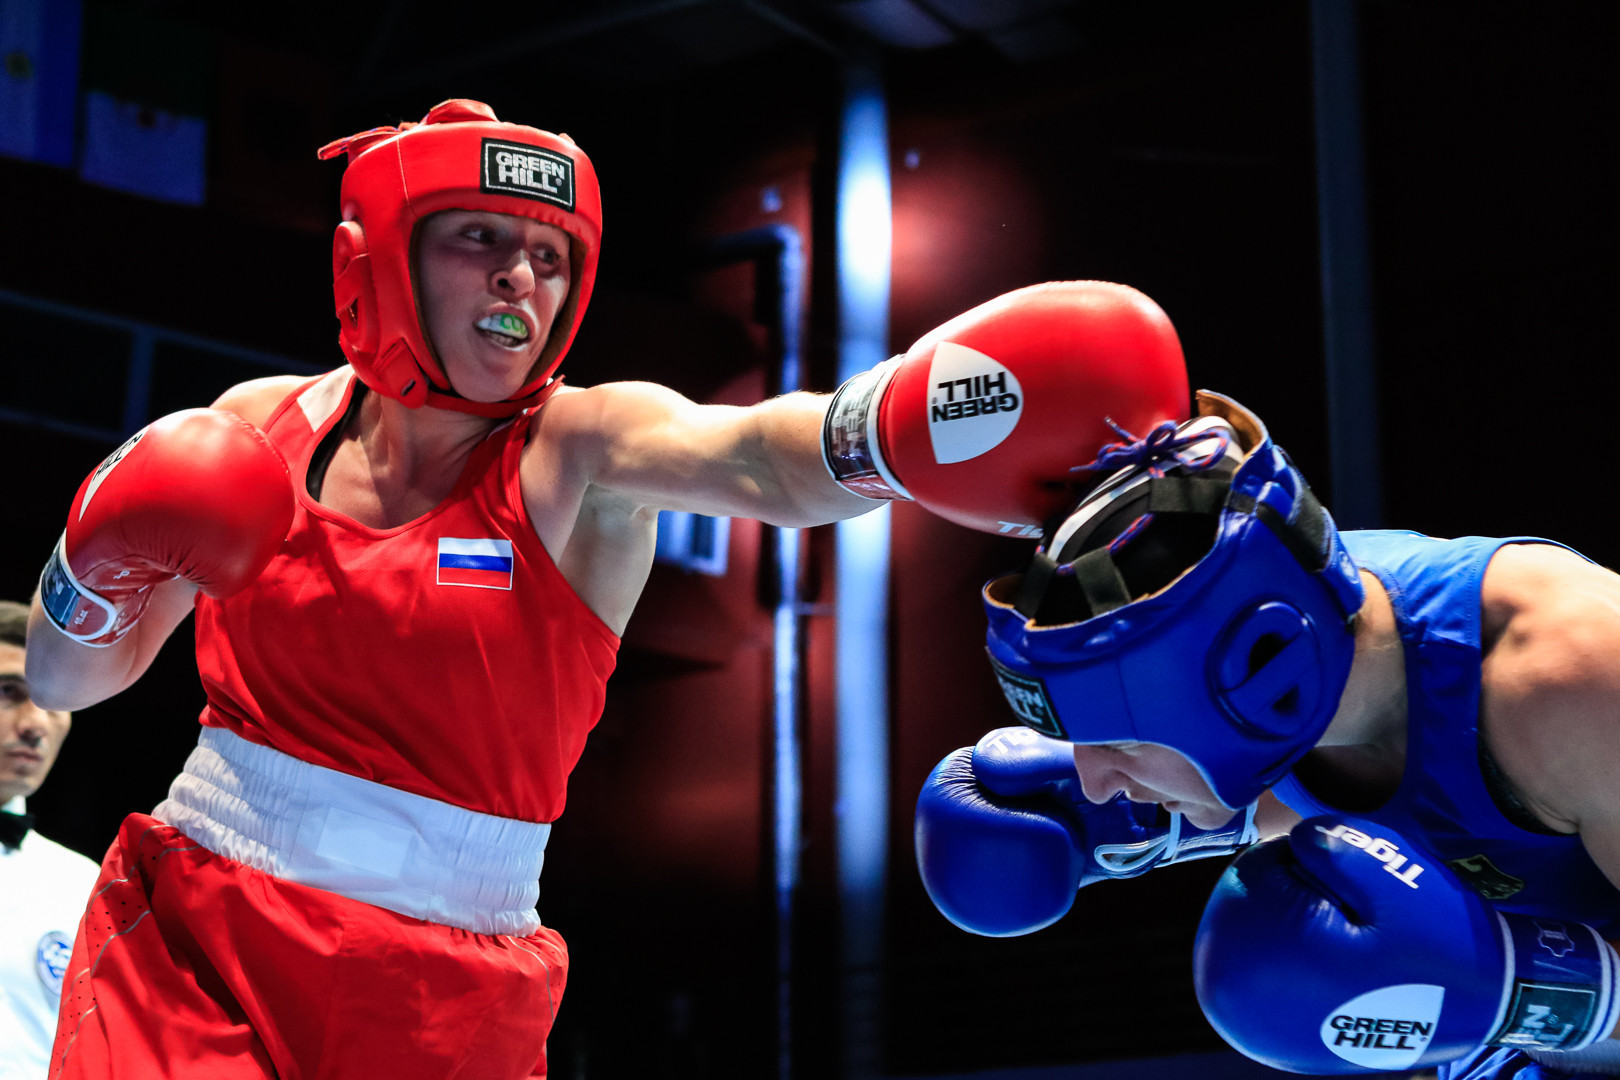 Dalgatova spurred on by home crowd at AIBA Women's World Boxing Championships